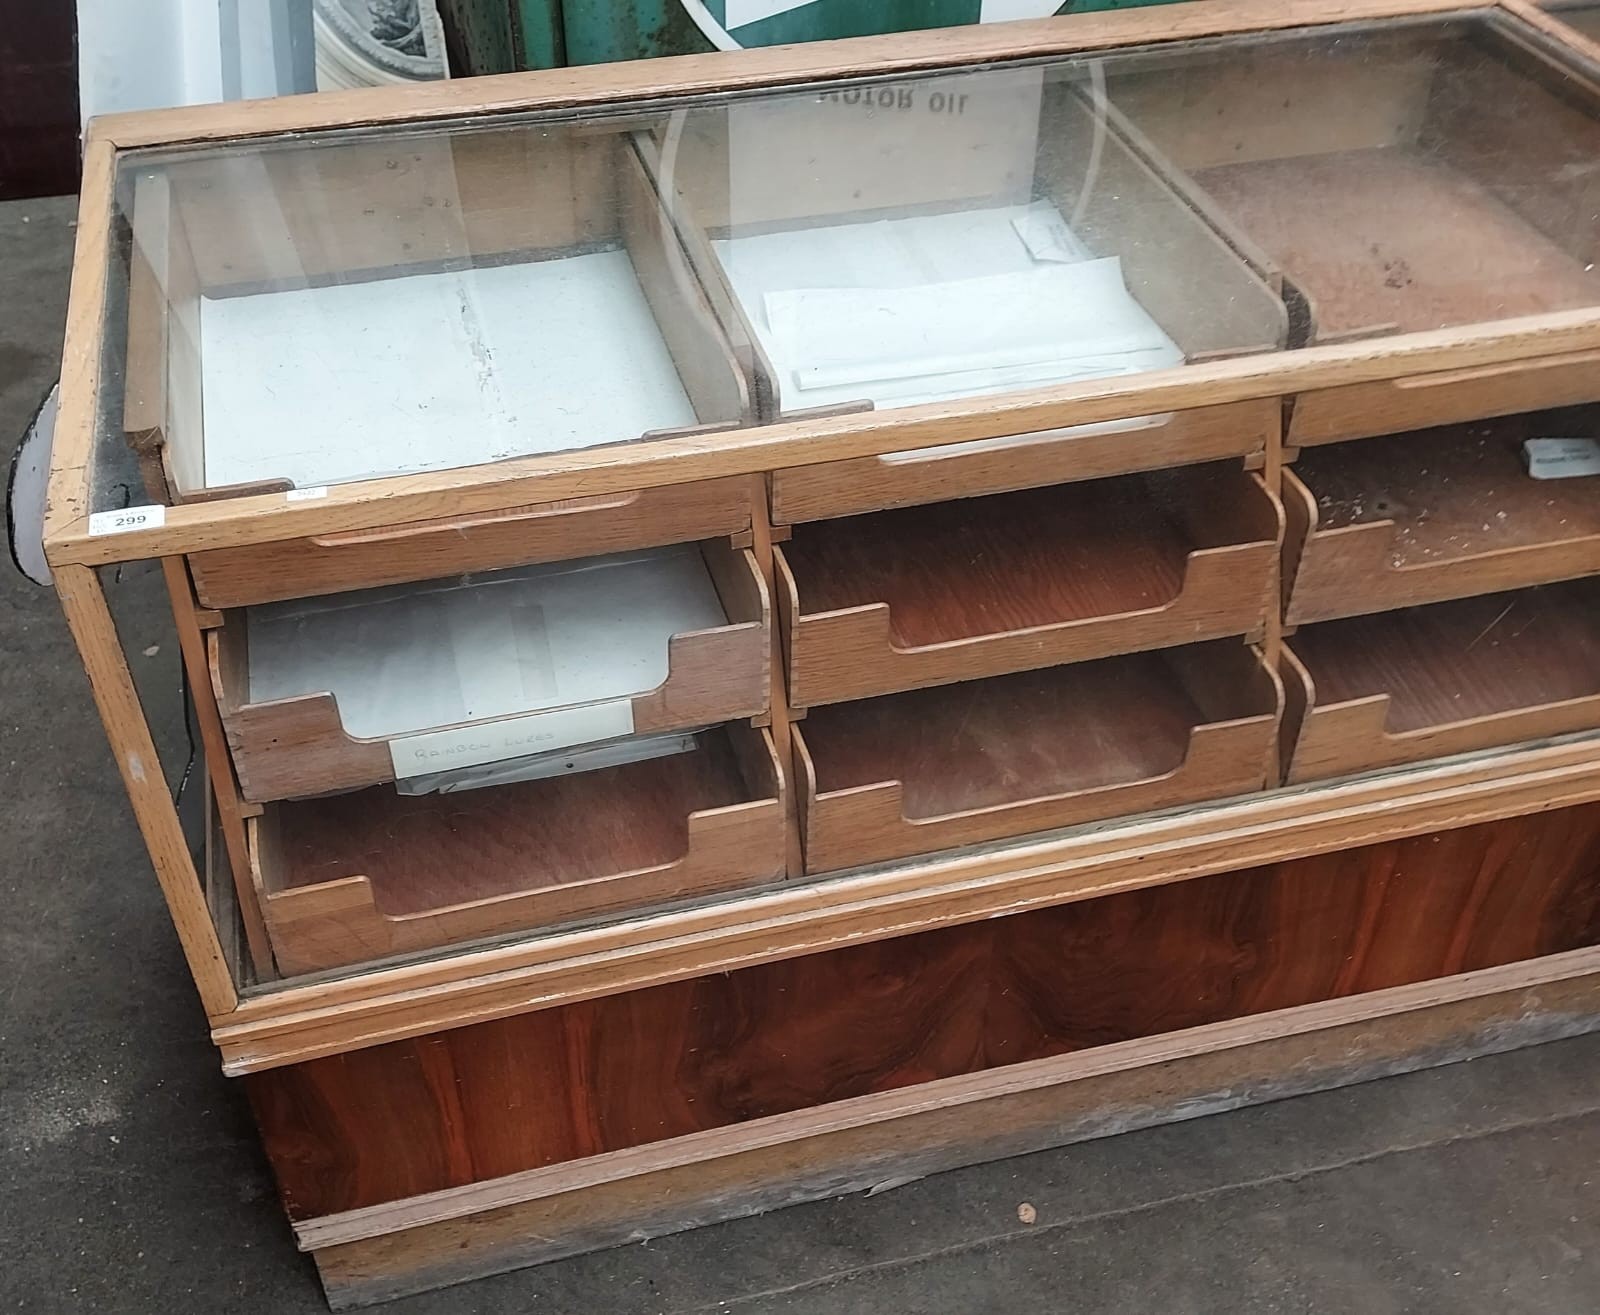 Retro haberdashery shop counter, glazed top and sides above banks of drawers and underneath interior - Image 5 of 6